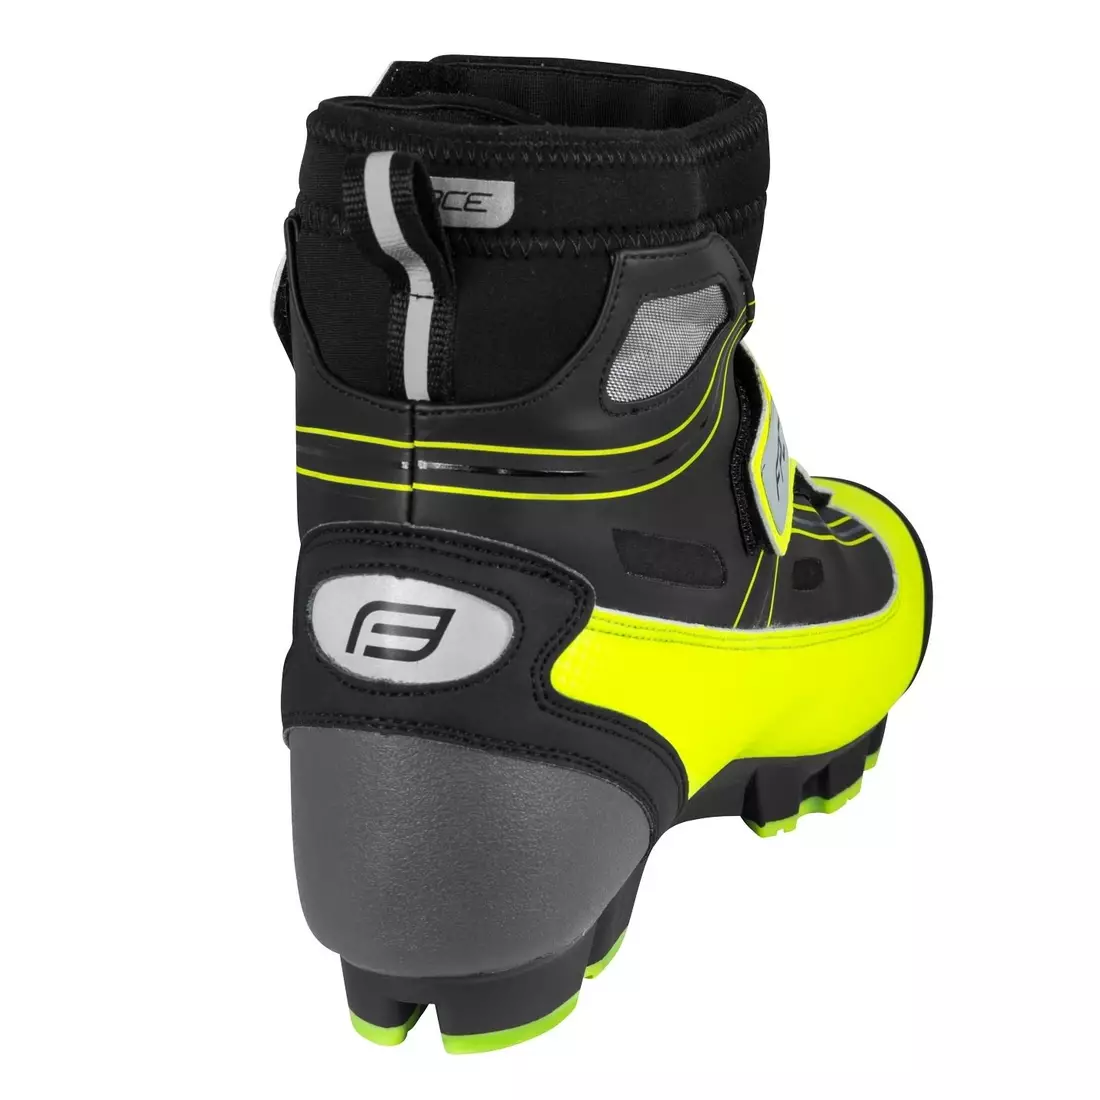 FORCE ICE MTB 94041 winter cycling shoes, black-fluorine